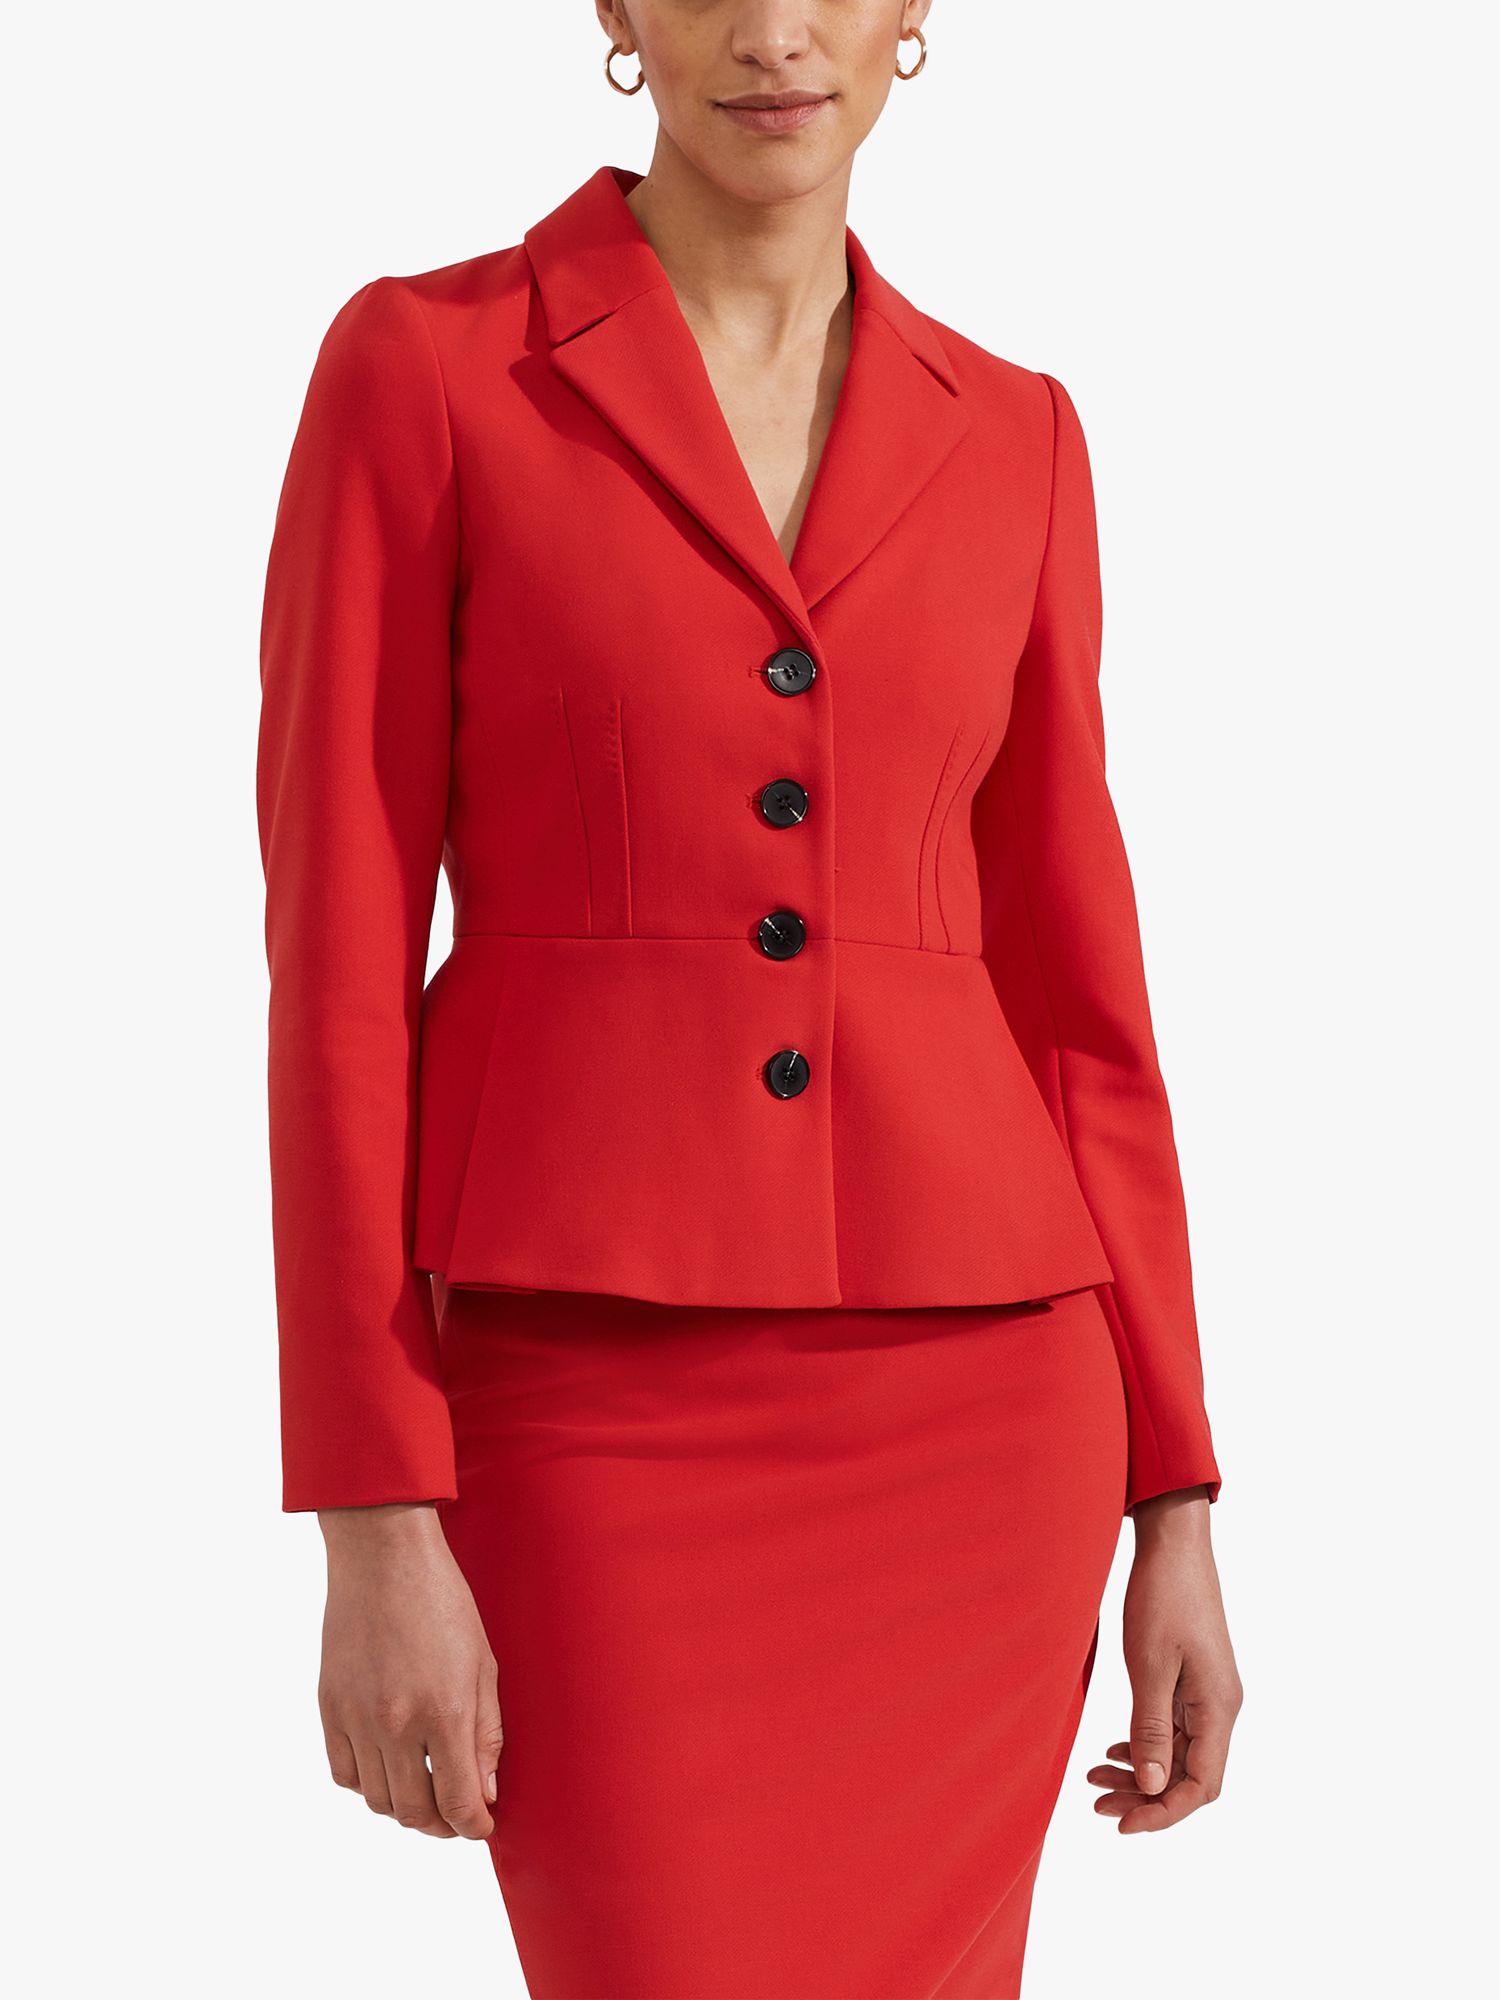 Hobbs Brielle Tailored Jacket, Cherry Red, 10